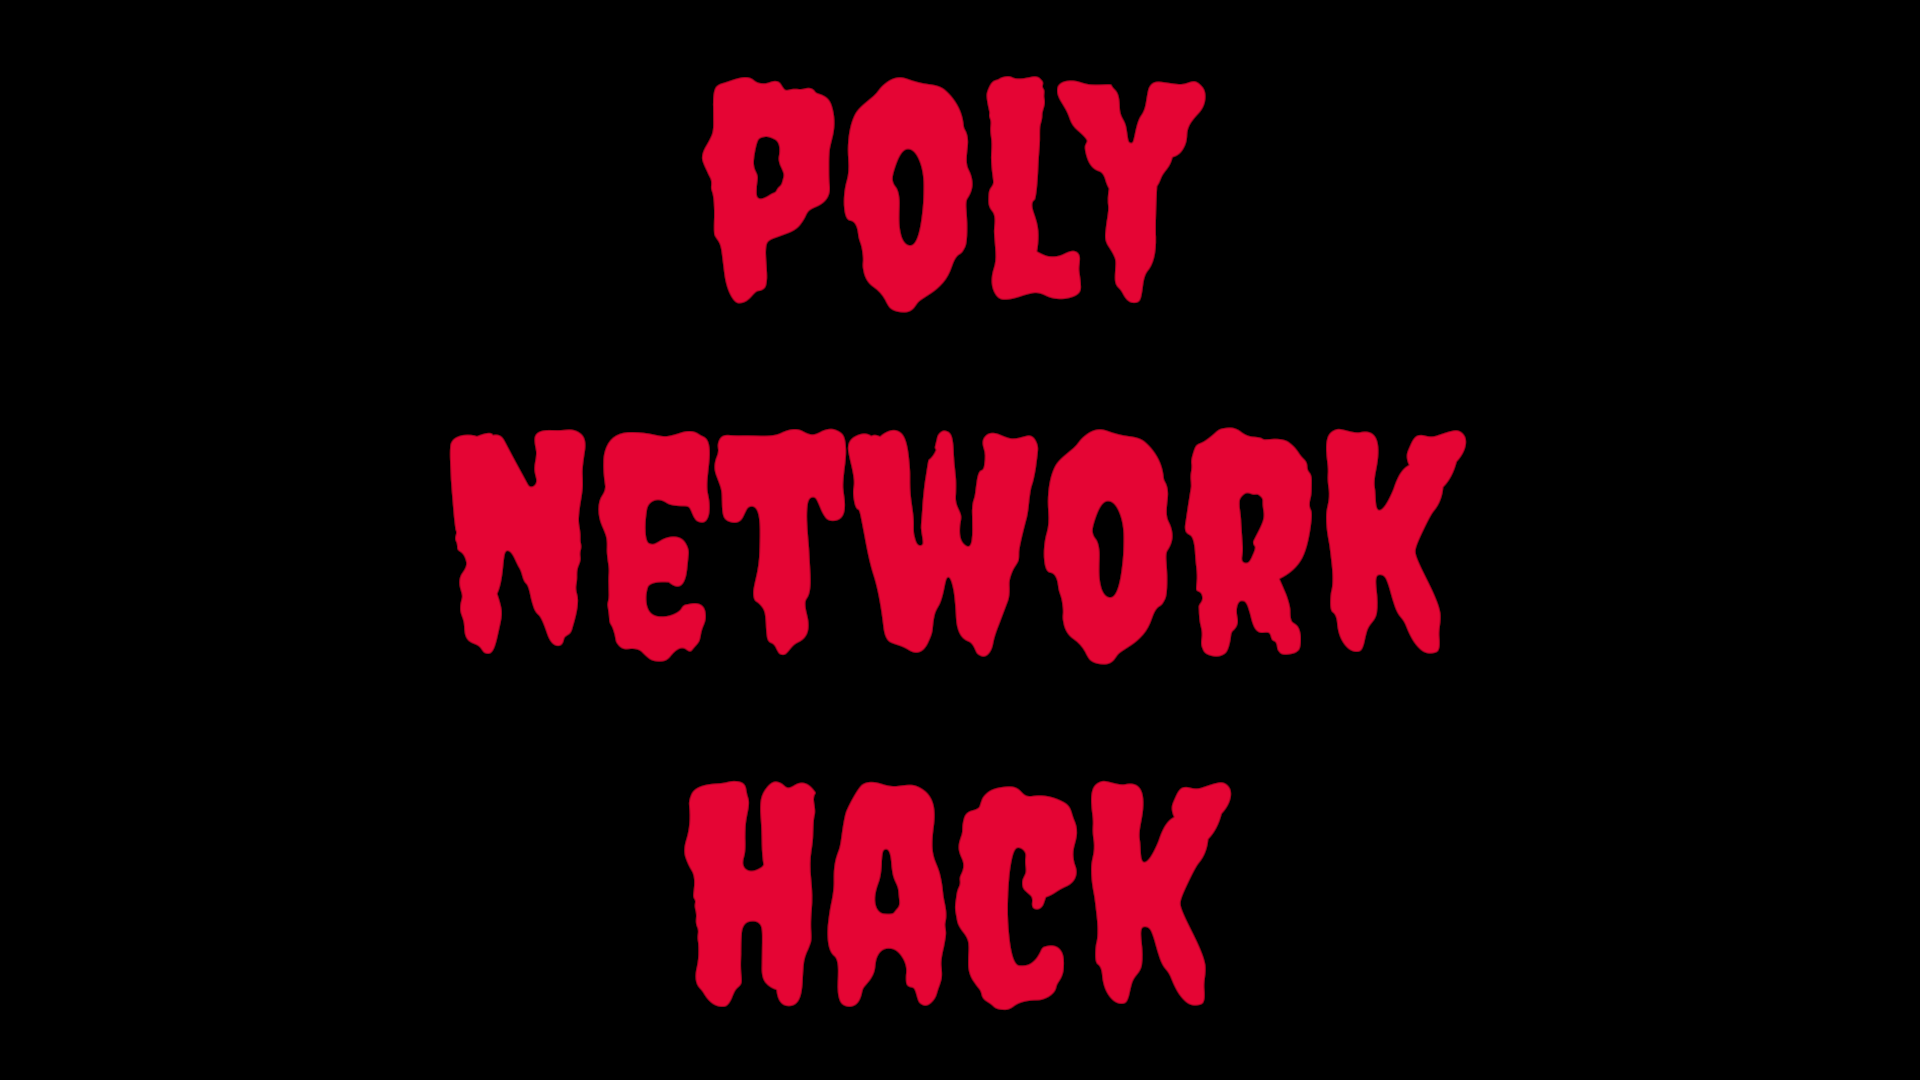 @cryptowingnut/poly-network-hack